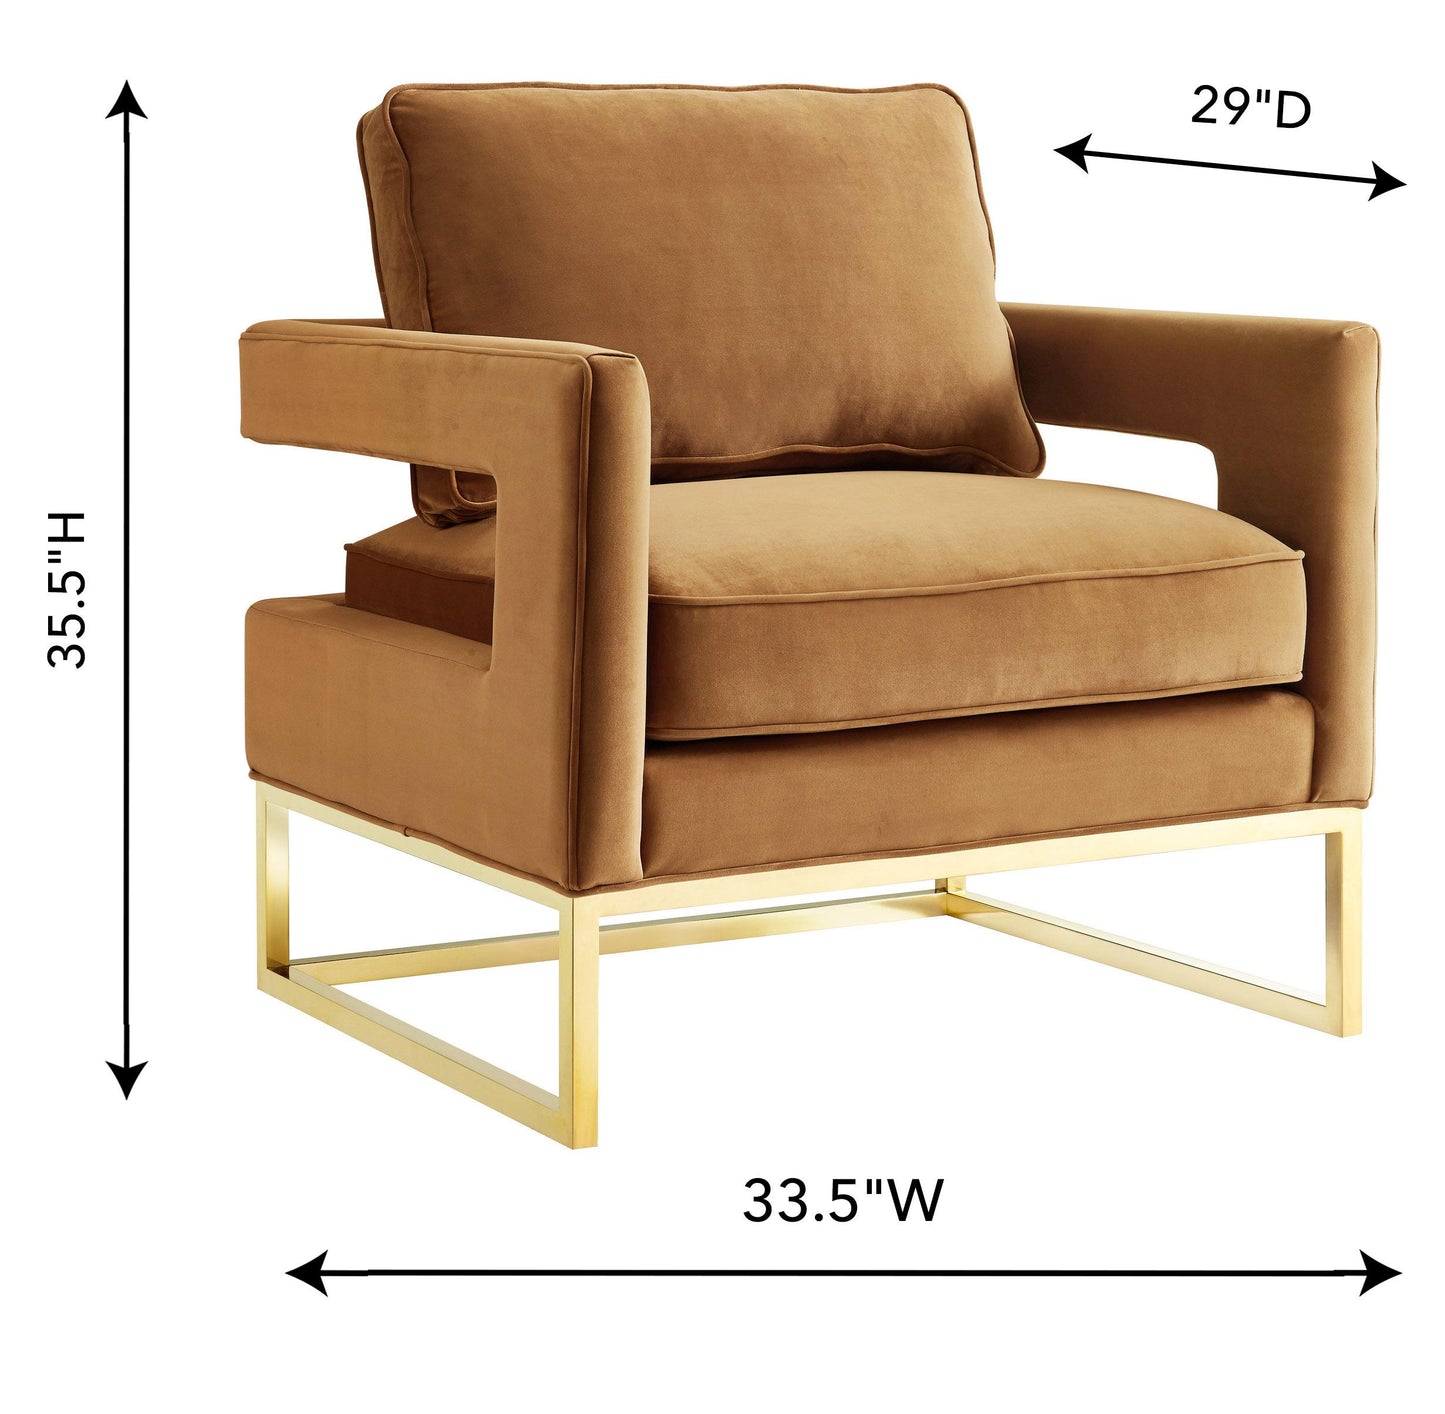 Tov Furniture Avery Cognac Velvet Chair With Polished Gold Base